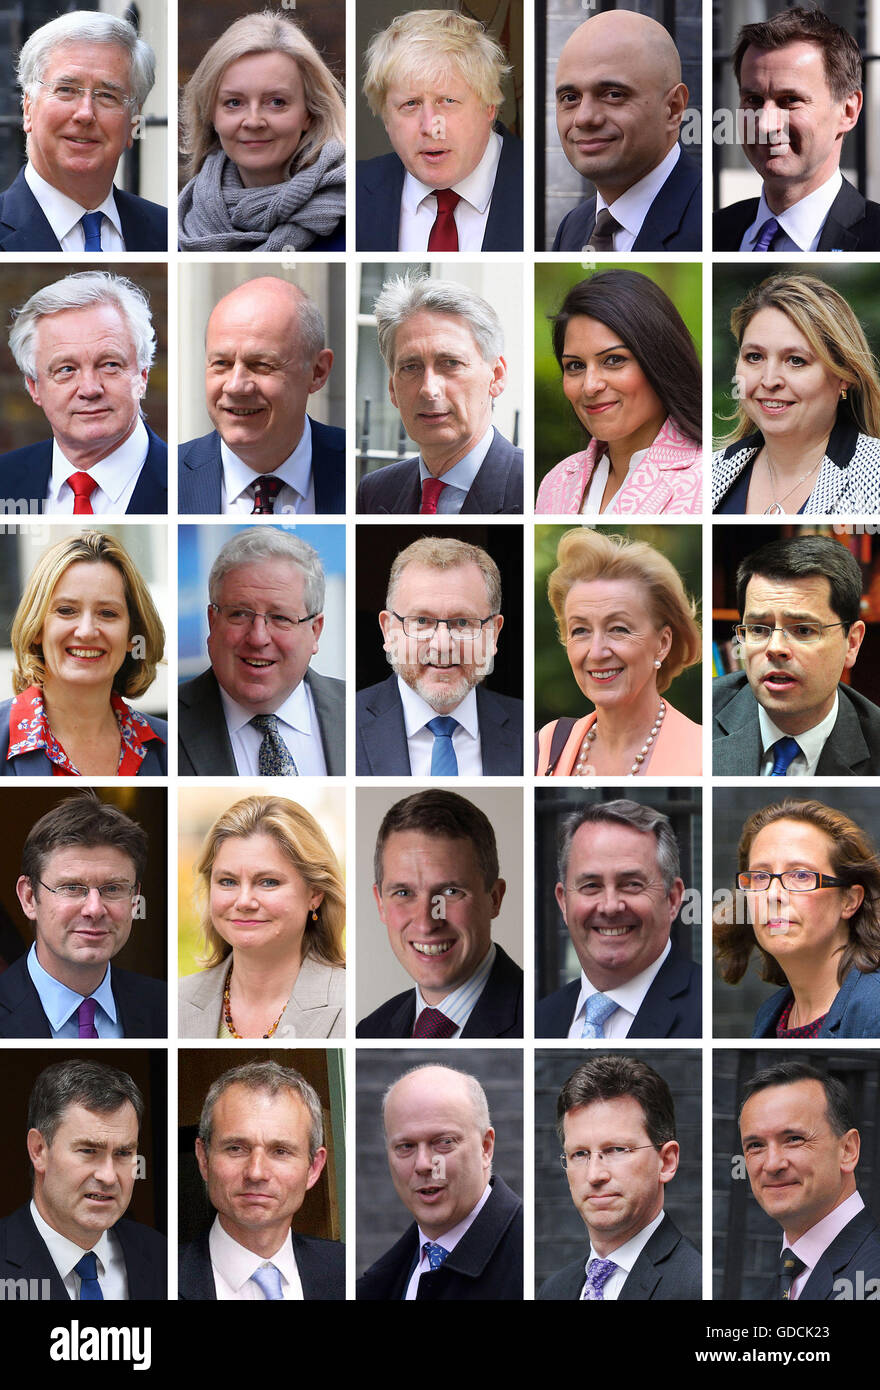 File photos of Prime Minister Theresa May's newly appointed Cabinet Ministers (top row left to right) Defence Secretary Michael Fallon, Justice Secretary Liz Truss, Foreign Secretary Boris Johnson, Communities Secretary Sajid Javid, Health Secretary Jeremy Hunt, (second row left to right) Secretary of State for Brexit David Davis, Work and Pensions Secretary Damian Green, Chancellor of the Exchequer Philip Hammond, International Development Secretary Priti Patel, Culture, Media and Sport Secretary Karen Bradley, (third row left to right) Home Secretary Amber Rudd, Tory Party chairman and Chanc Stock Photo